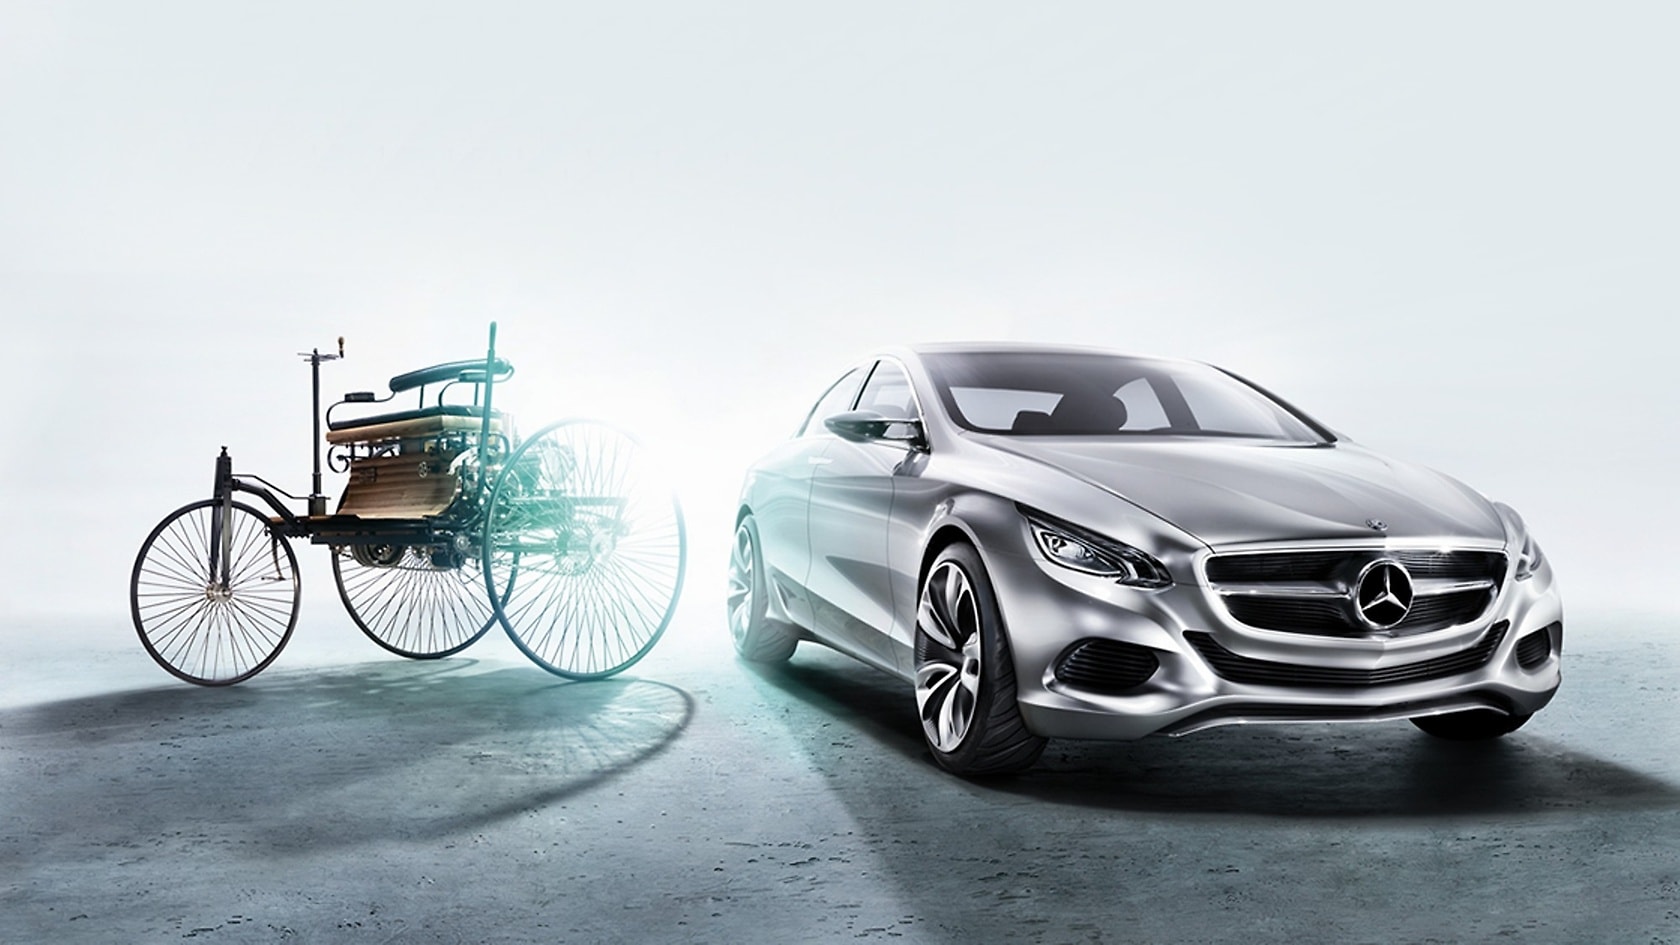 From the beginnings of the automobile with Benz Patent Motorcar through to fuel cells and electric cars.